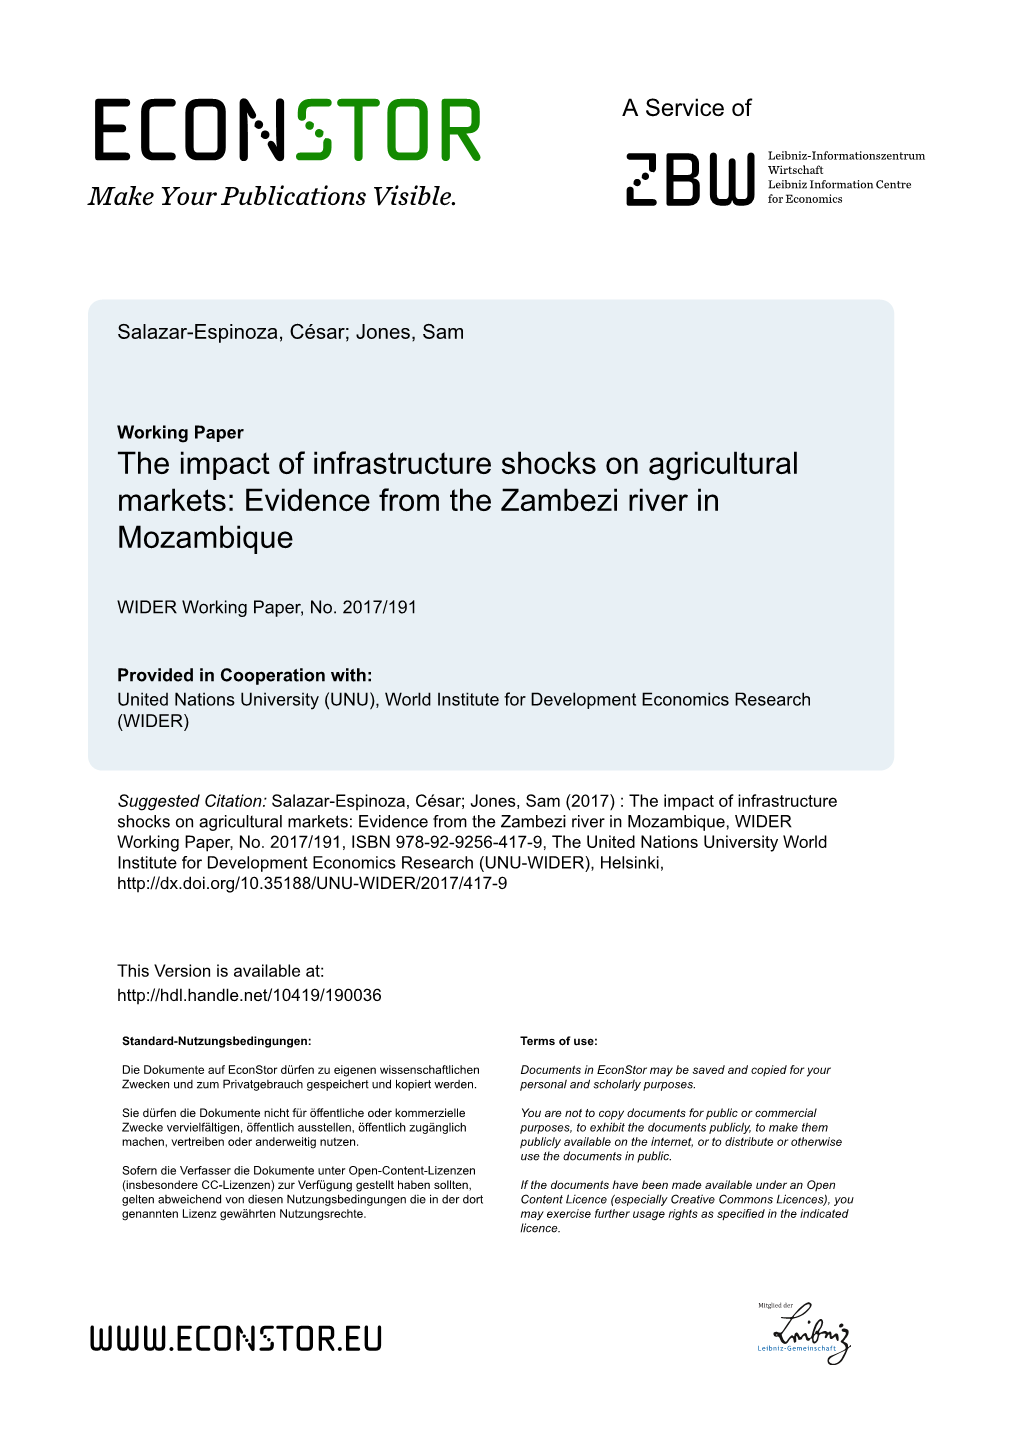 The Impact of Infrastructure Shocks on Agricultural Markets: Evidence from the Zambezi River in Mozambique